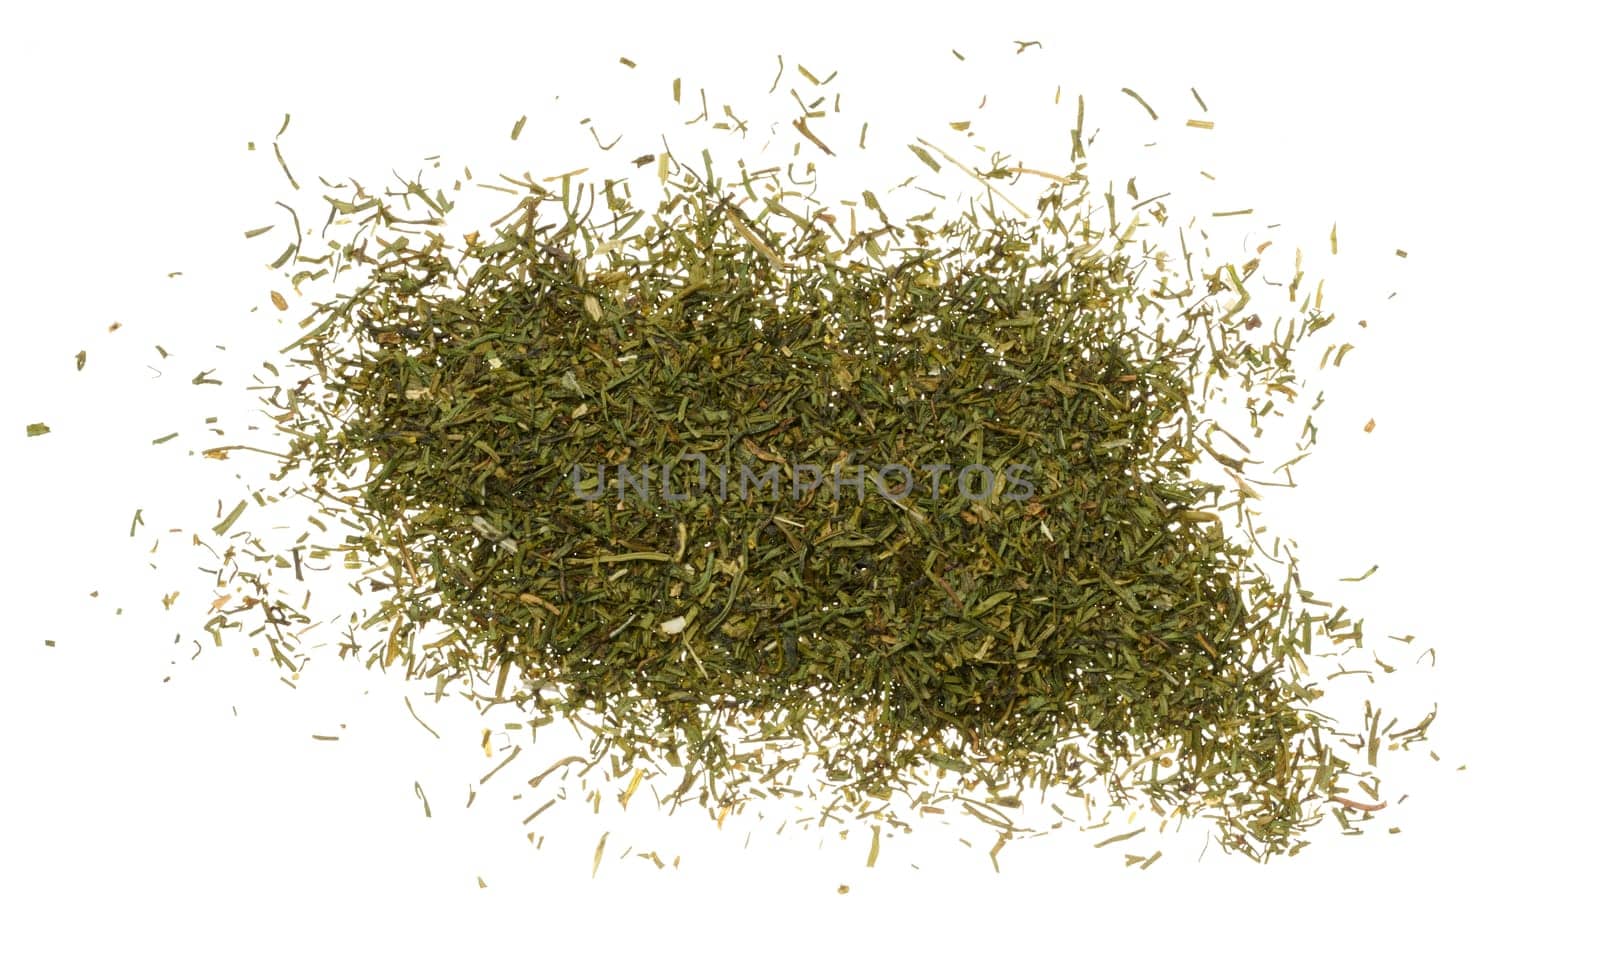 Dried dill scattered on isolated background, top view by ndanko